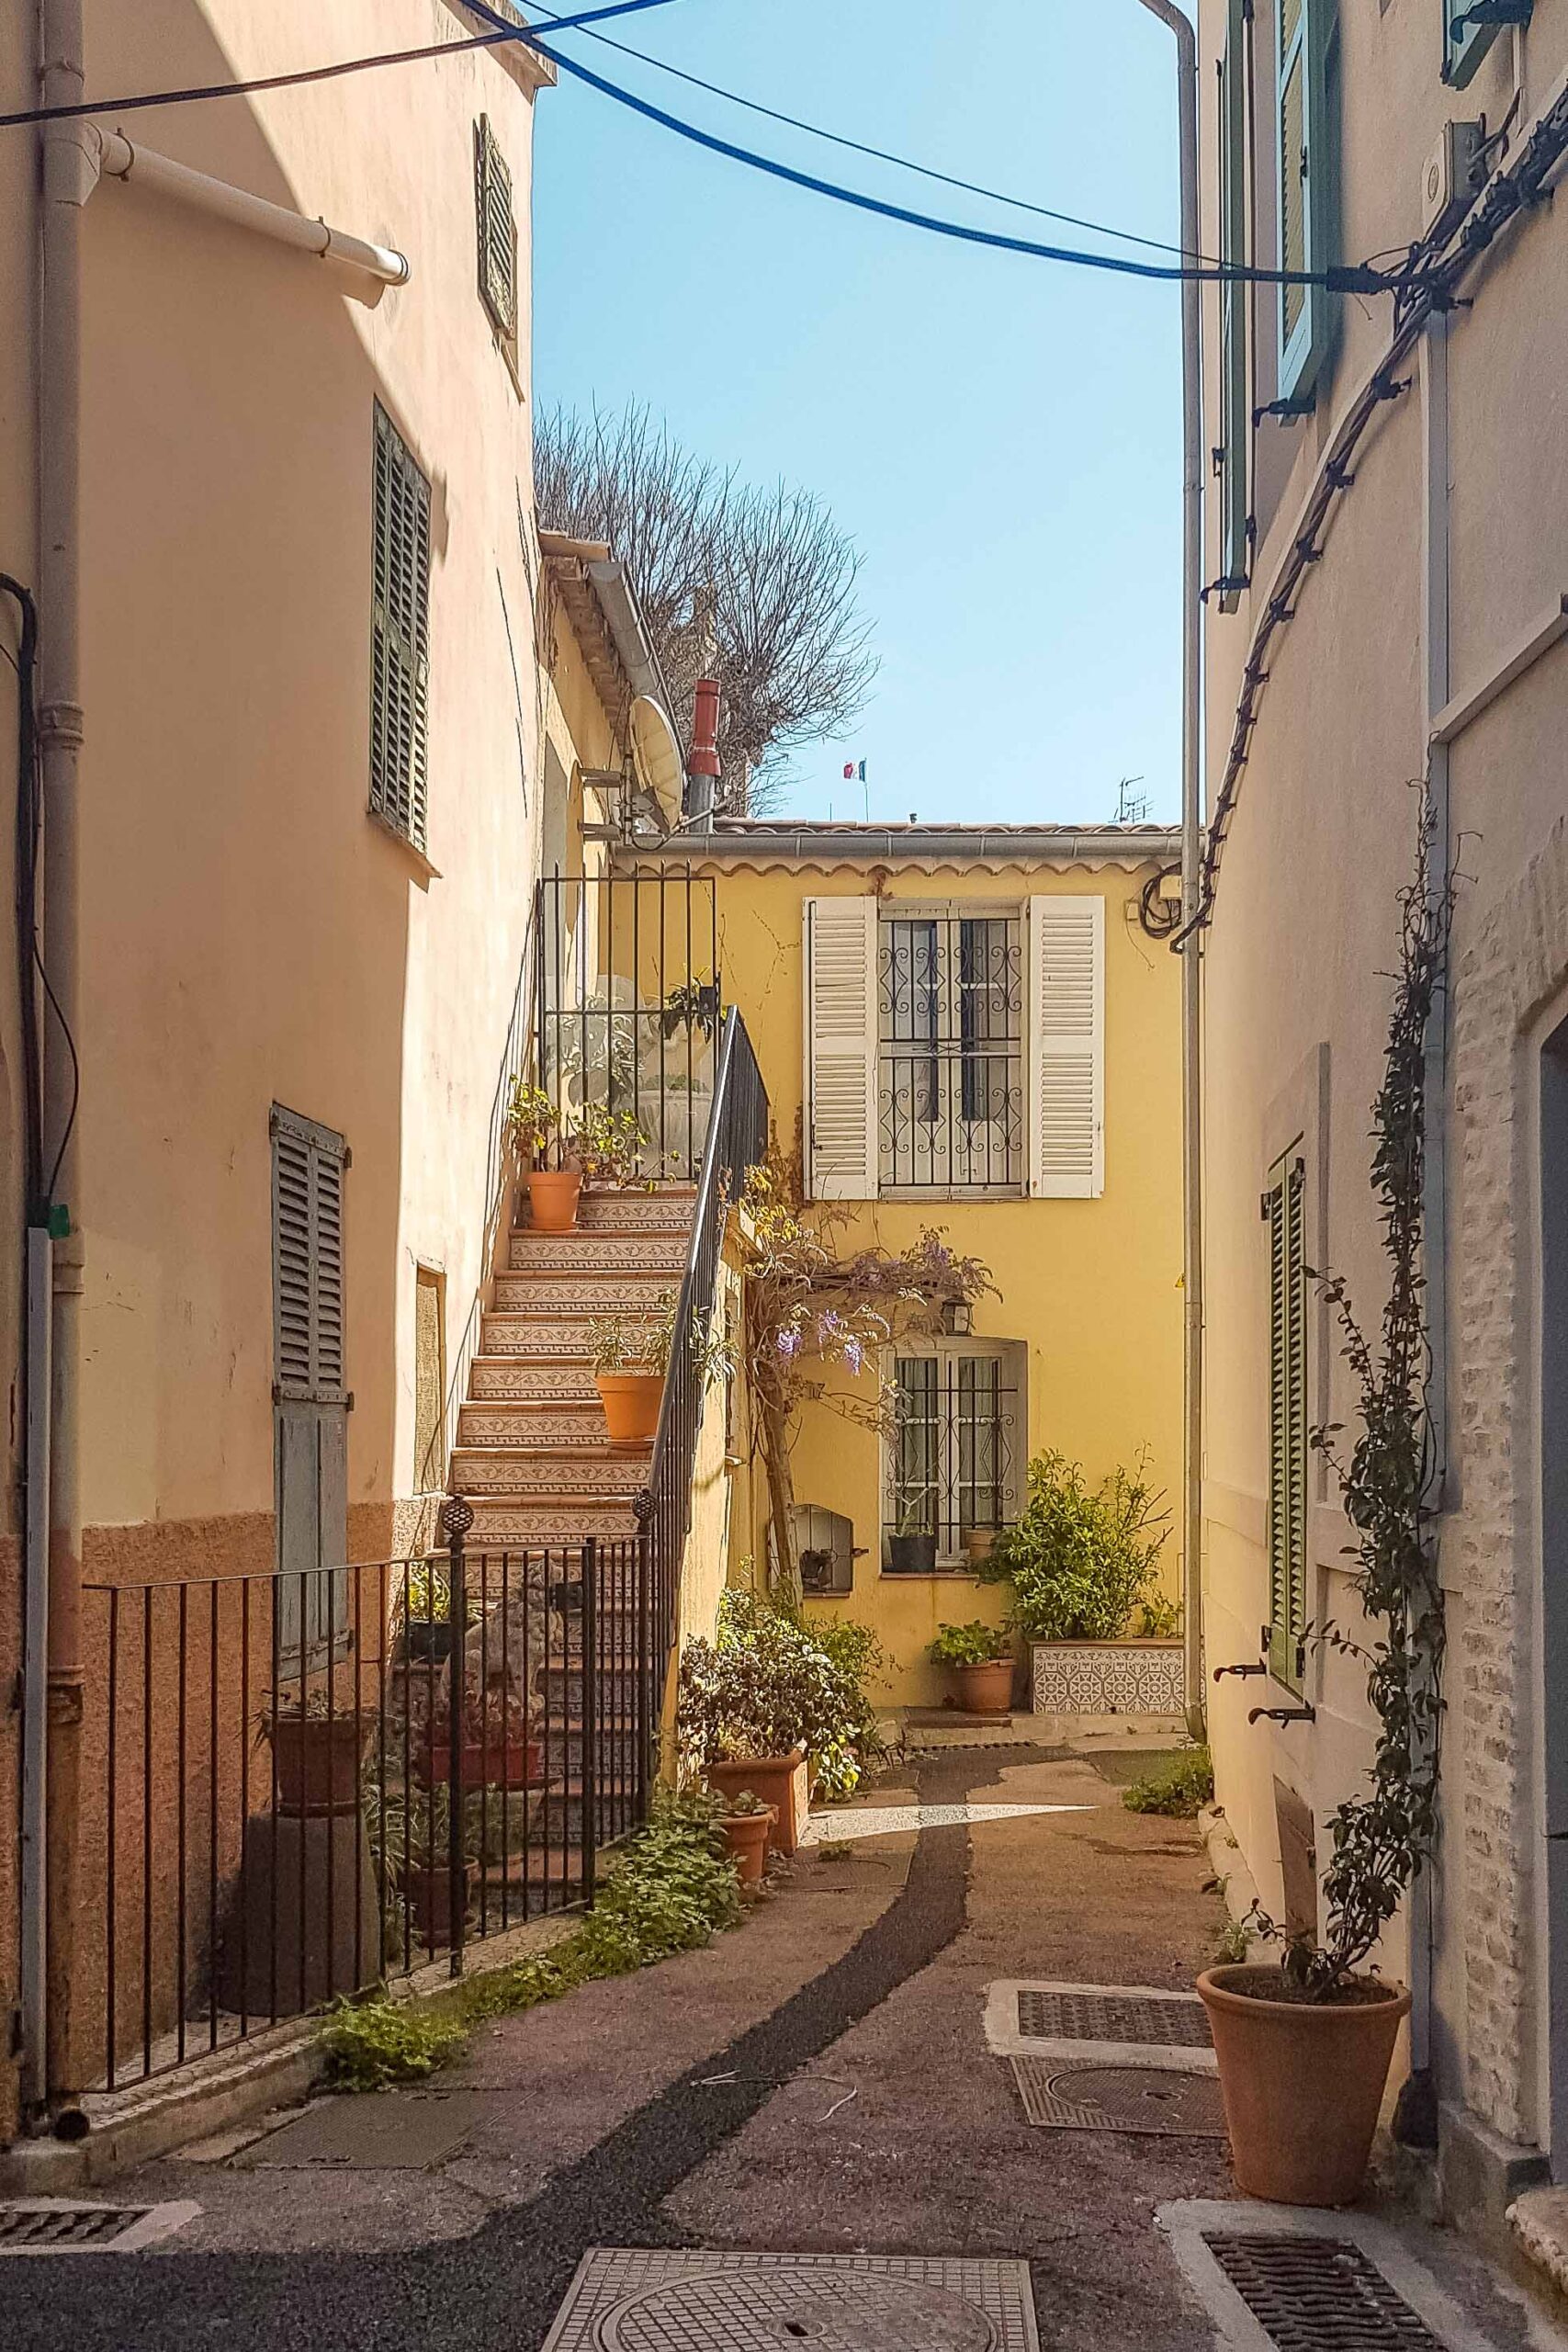 Small colourful street with potted plants in the Old Town of Antibes, France